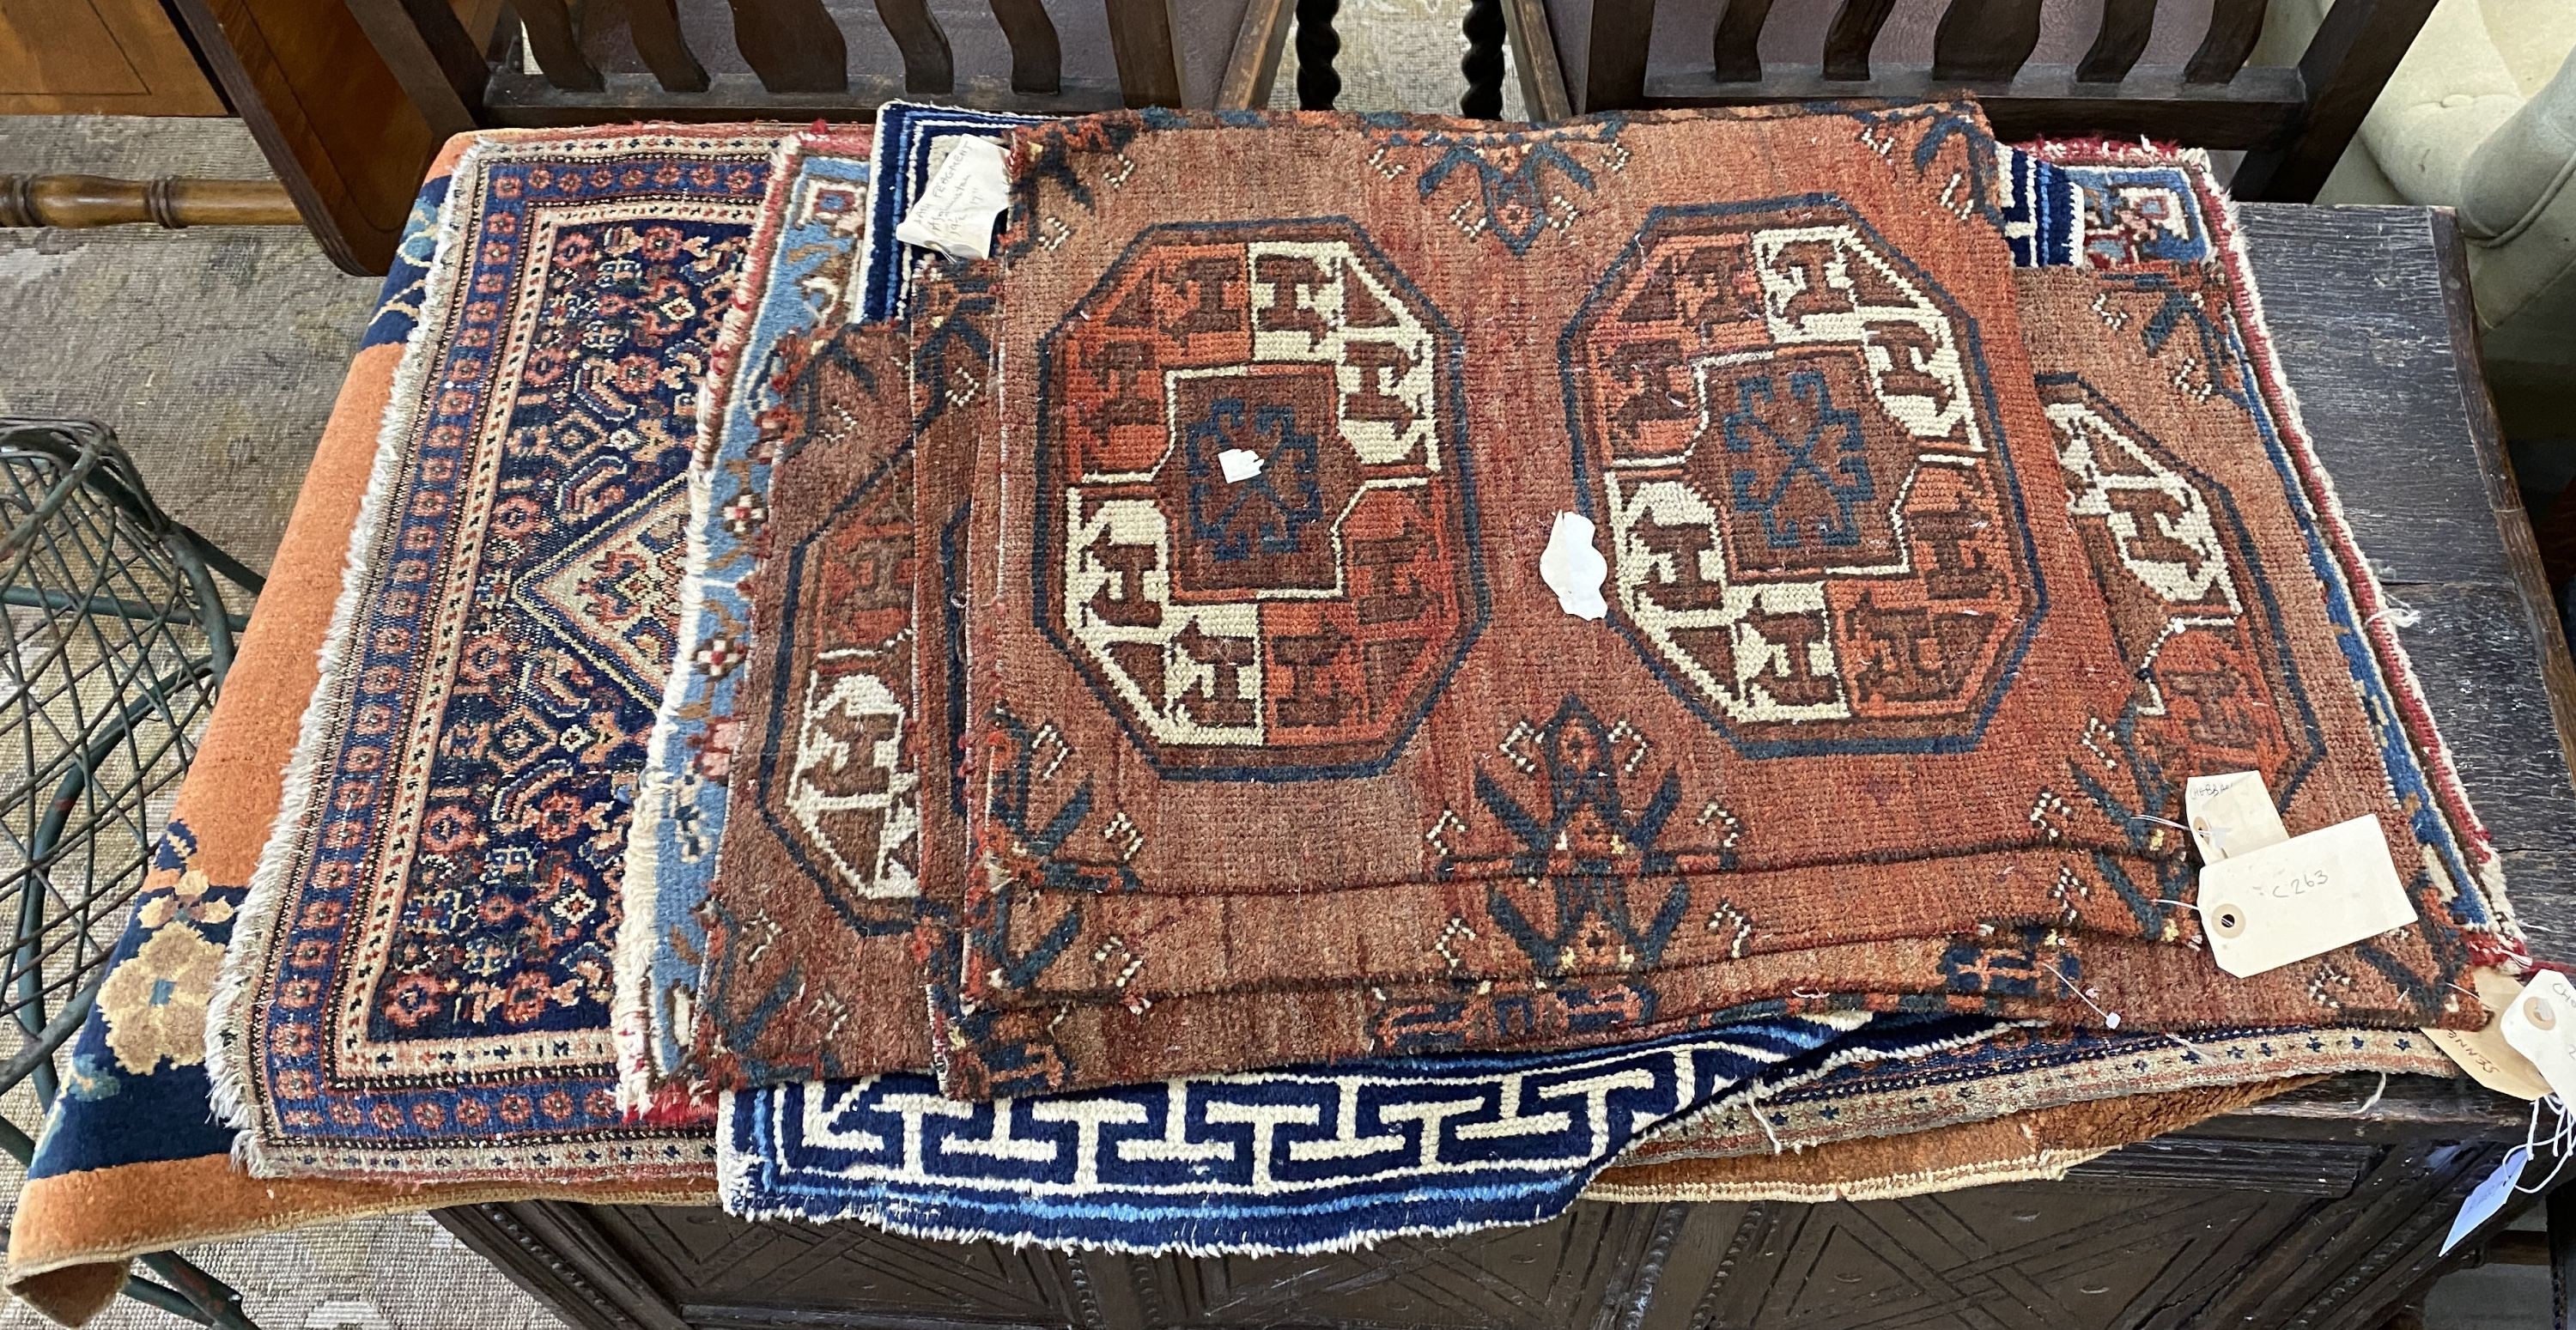 Nine Afghan, Persian and Chinese rug fragments.